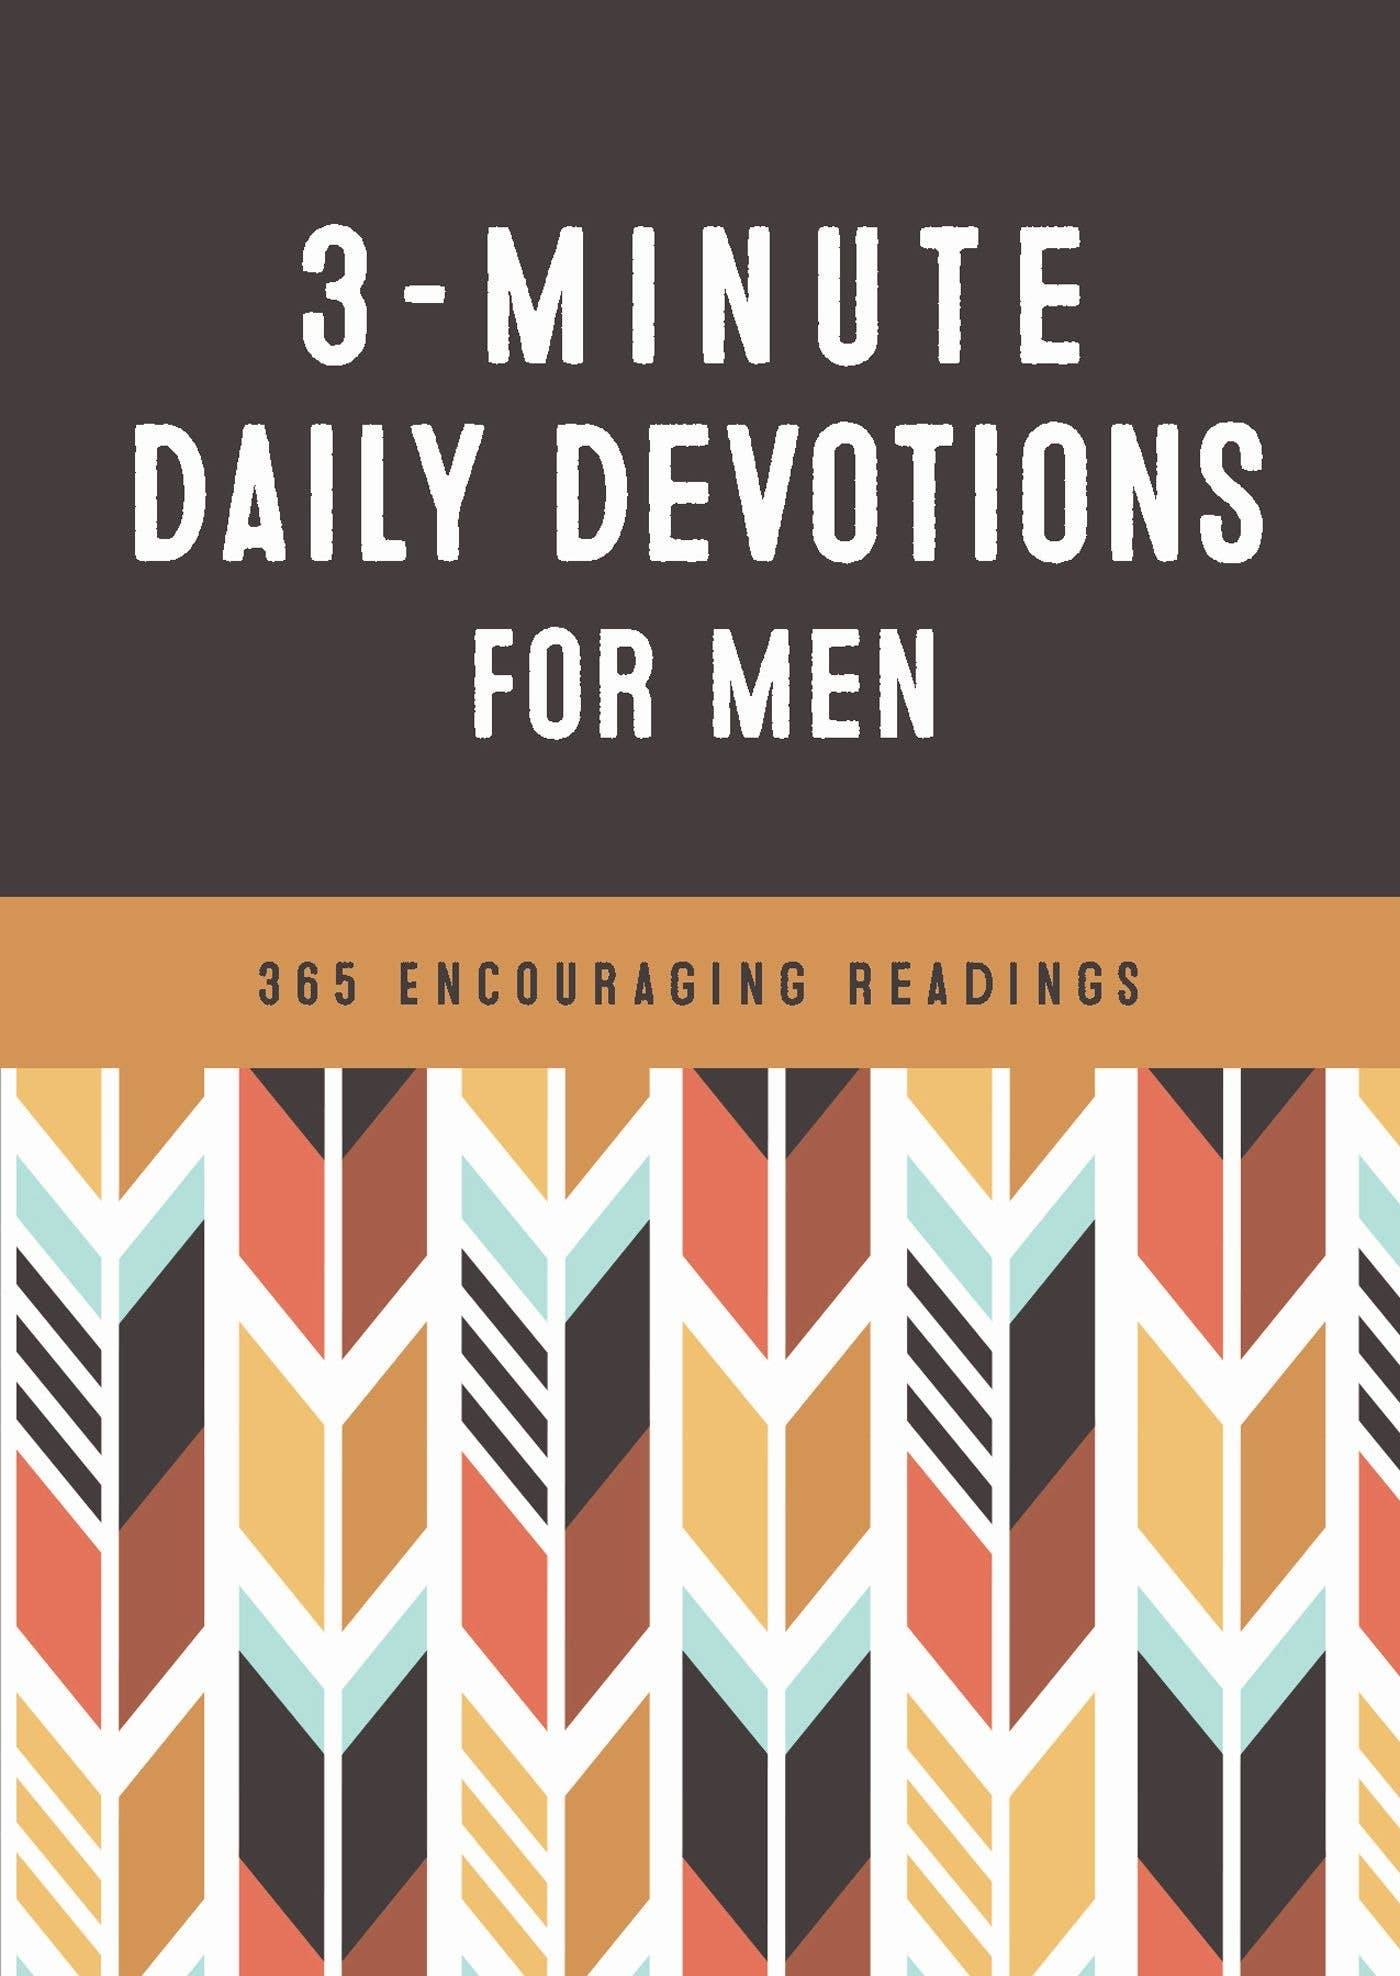 3-Minute Daily Devotions for Men